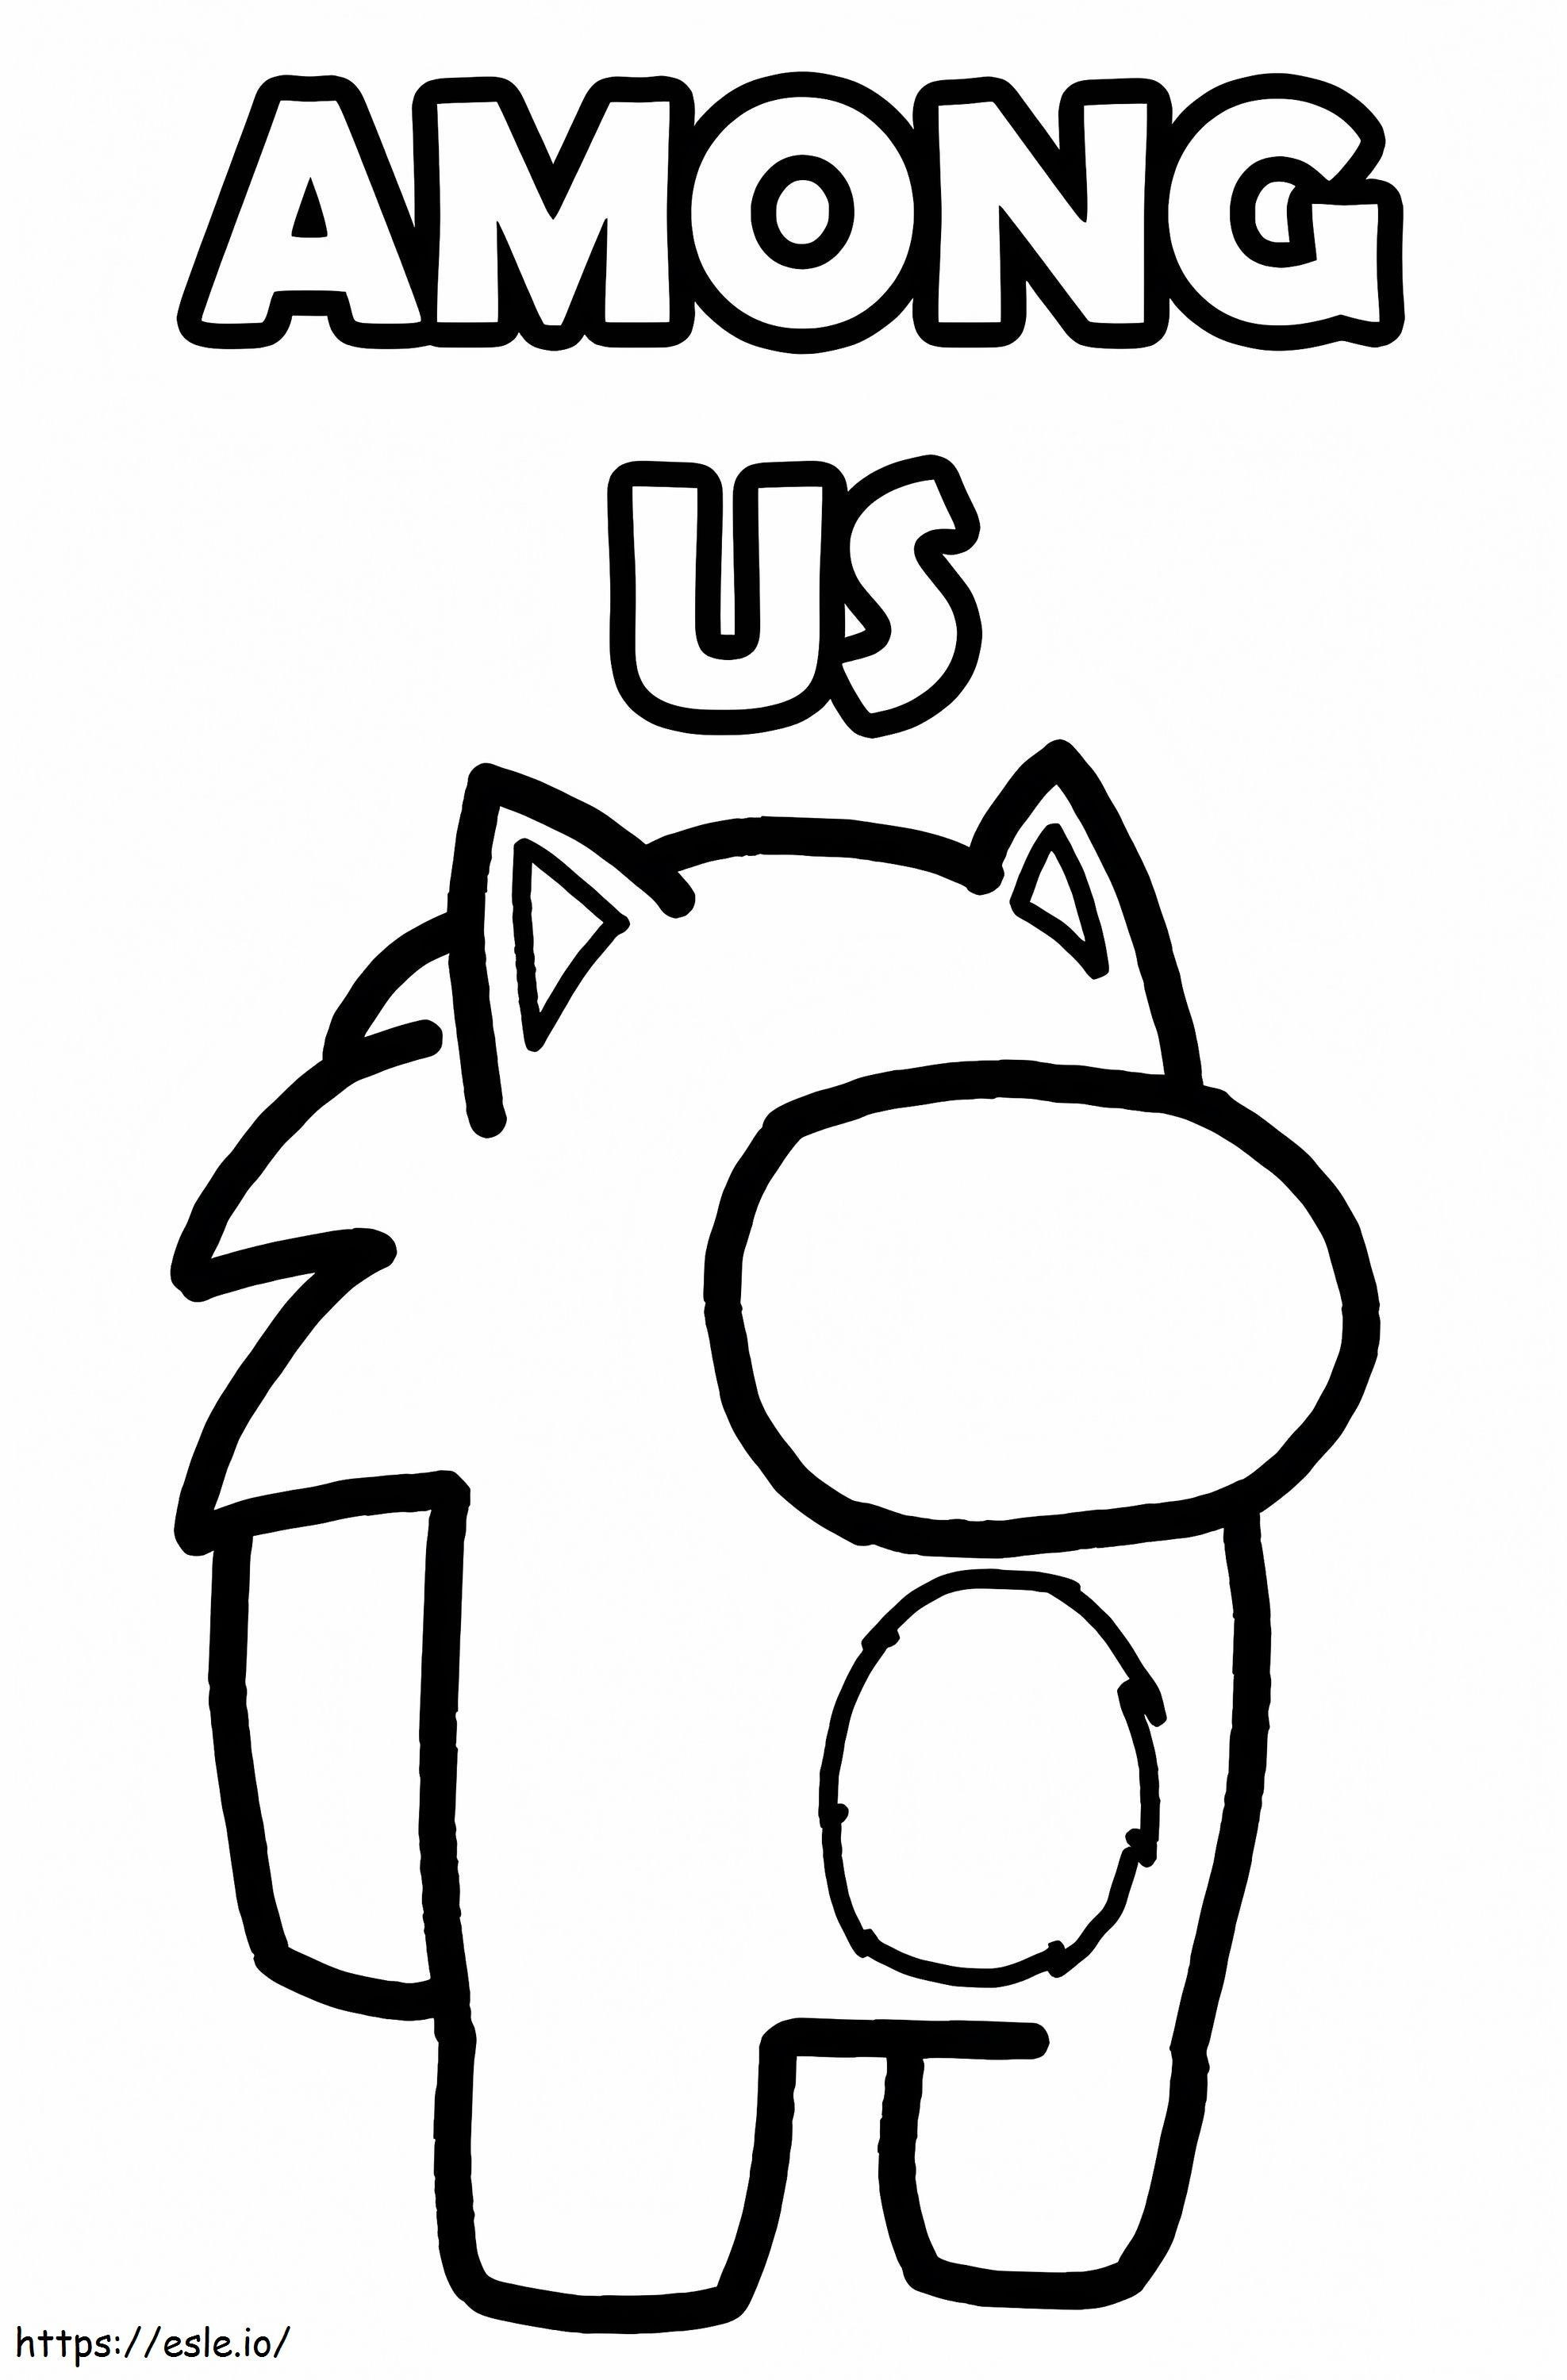 Among Us Sonic coloring page